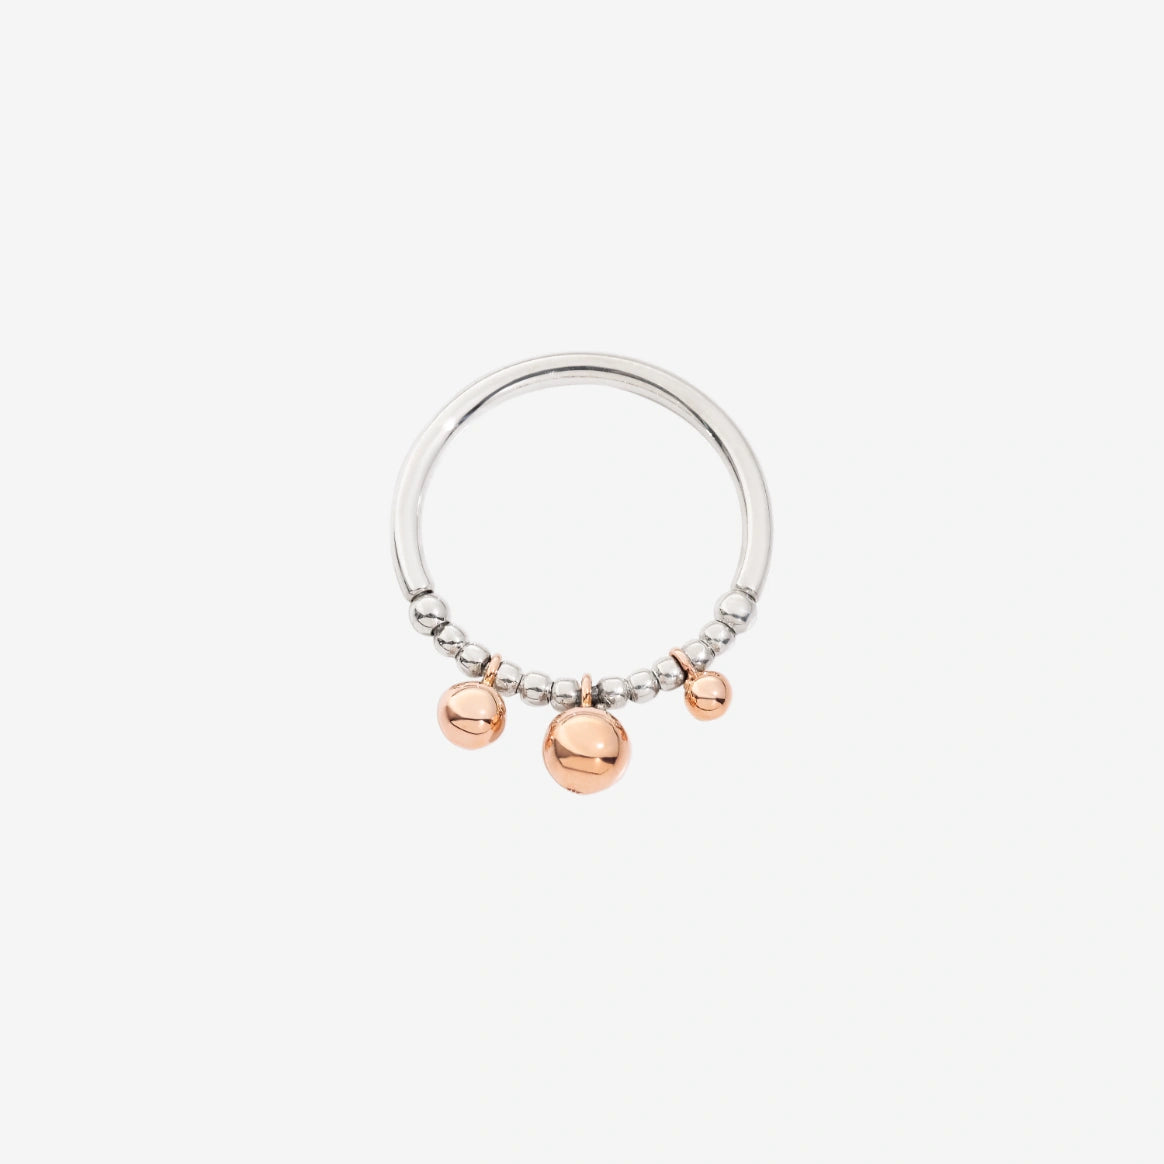 Dodo Bollicine Ring in Sterling Silver with Rose Gold and Silver Spheres - Orsini Jewellers